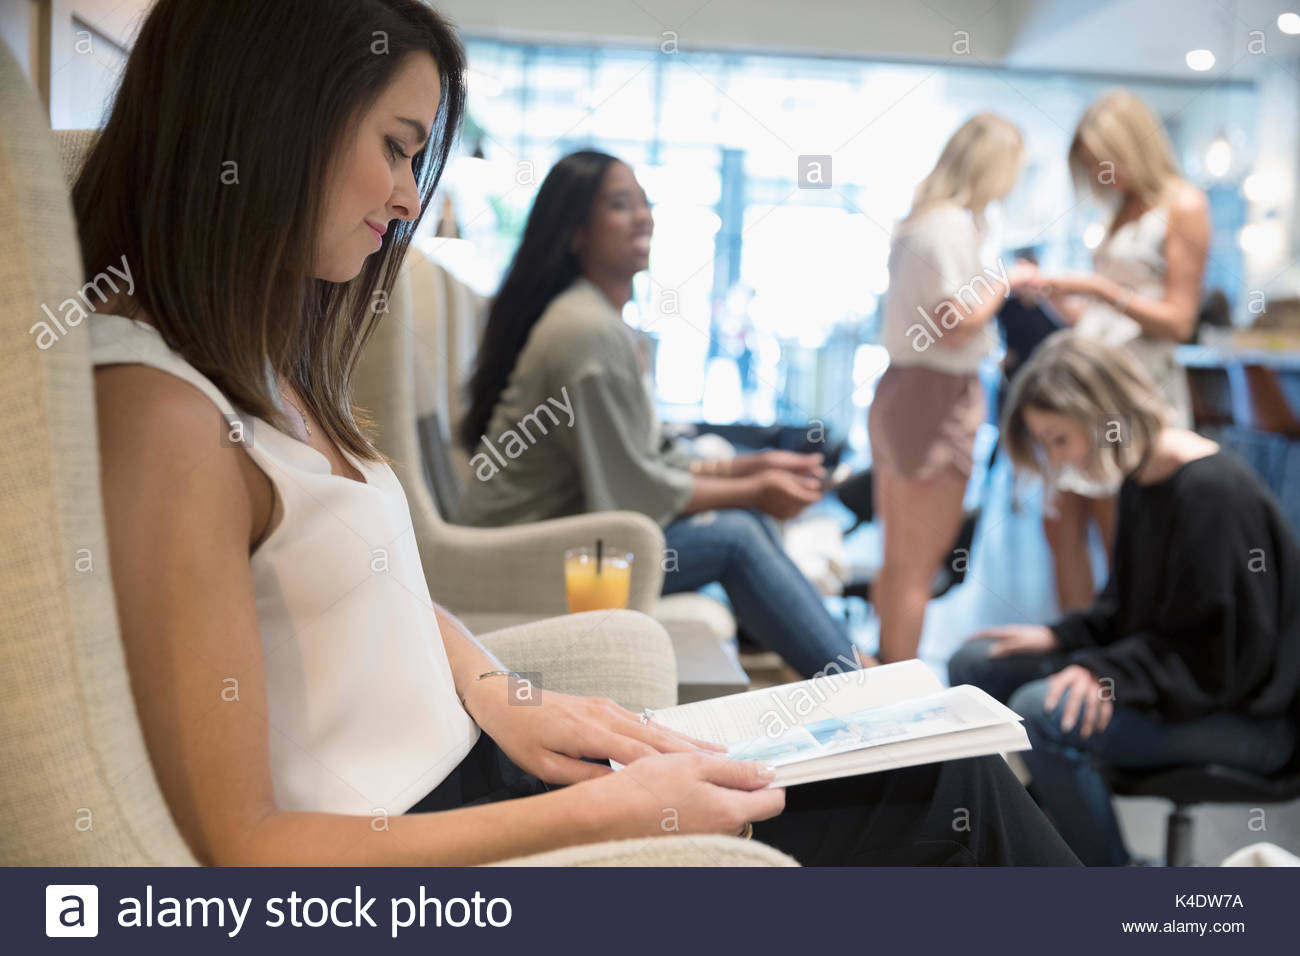 Woman reading magazine and getting pedicure in nail salon Stock Photo